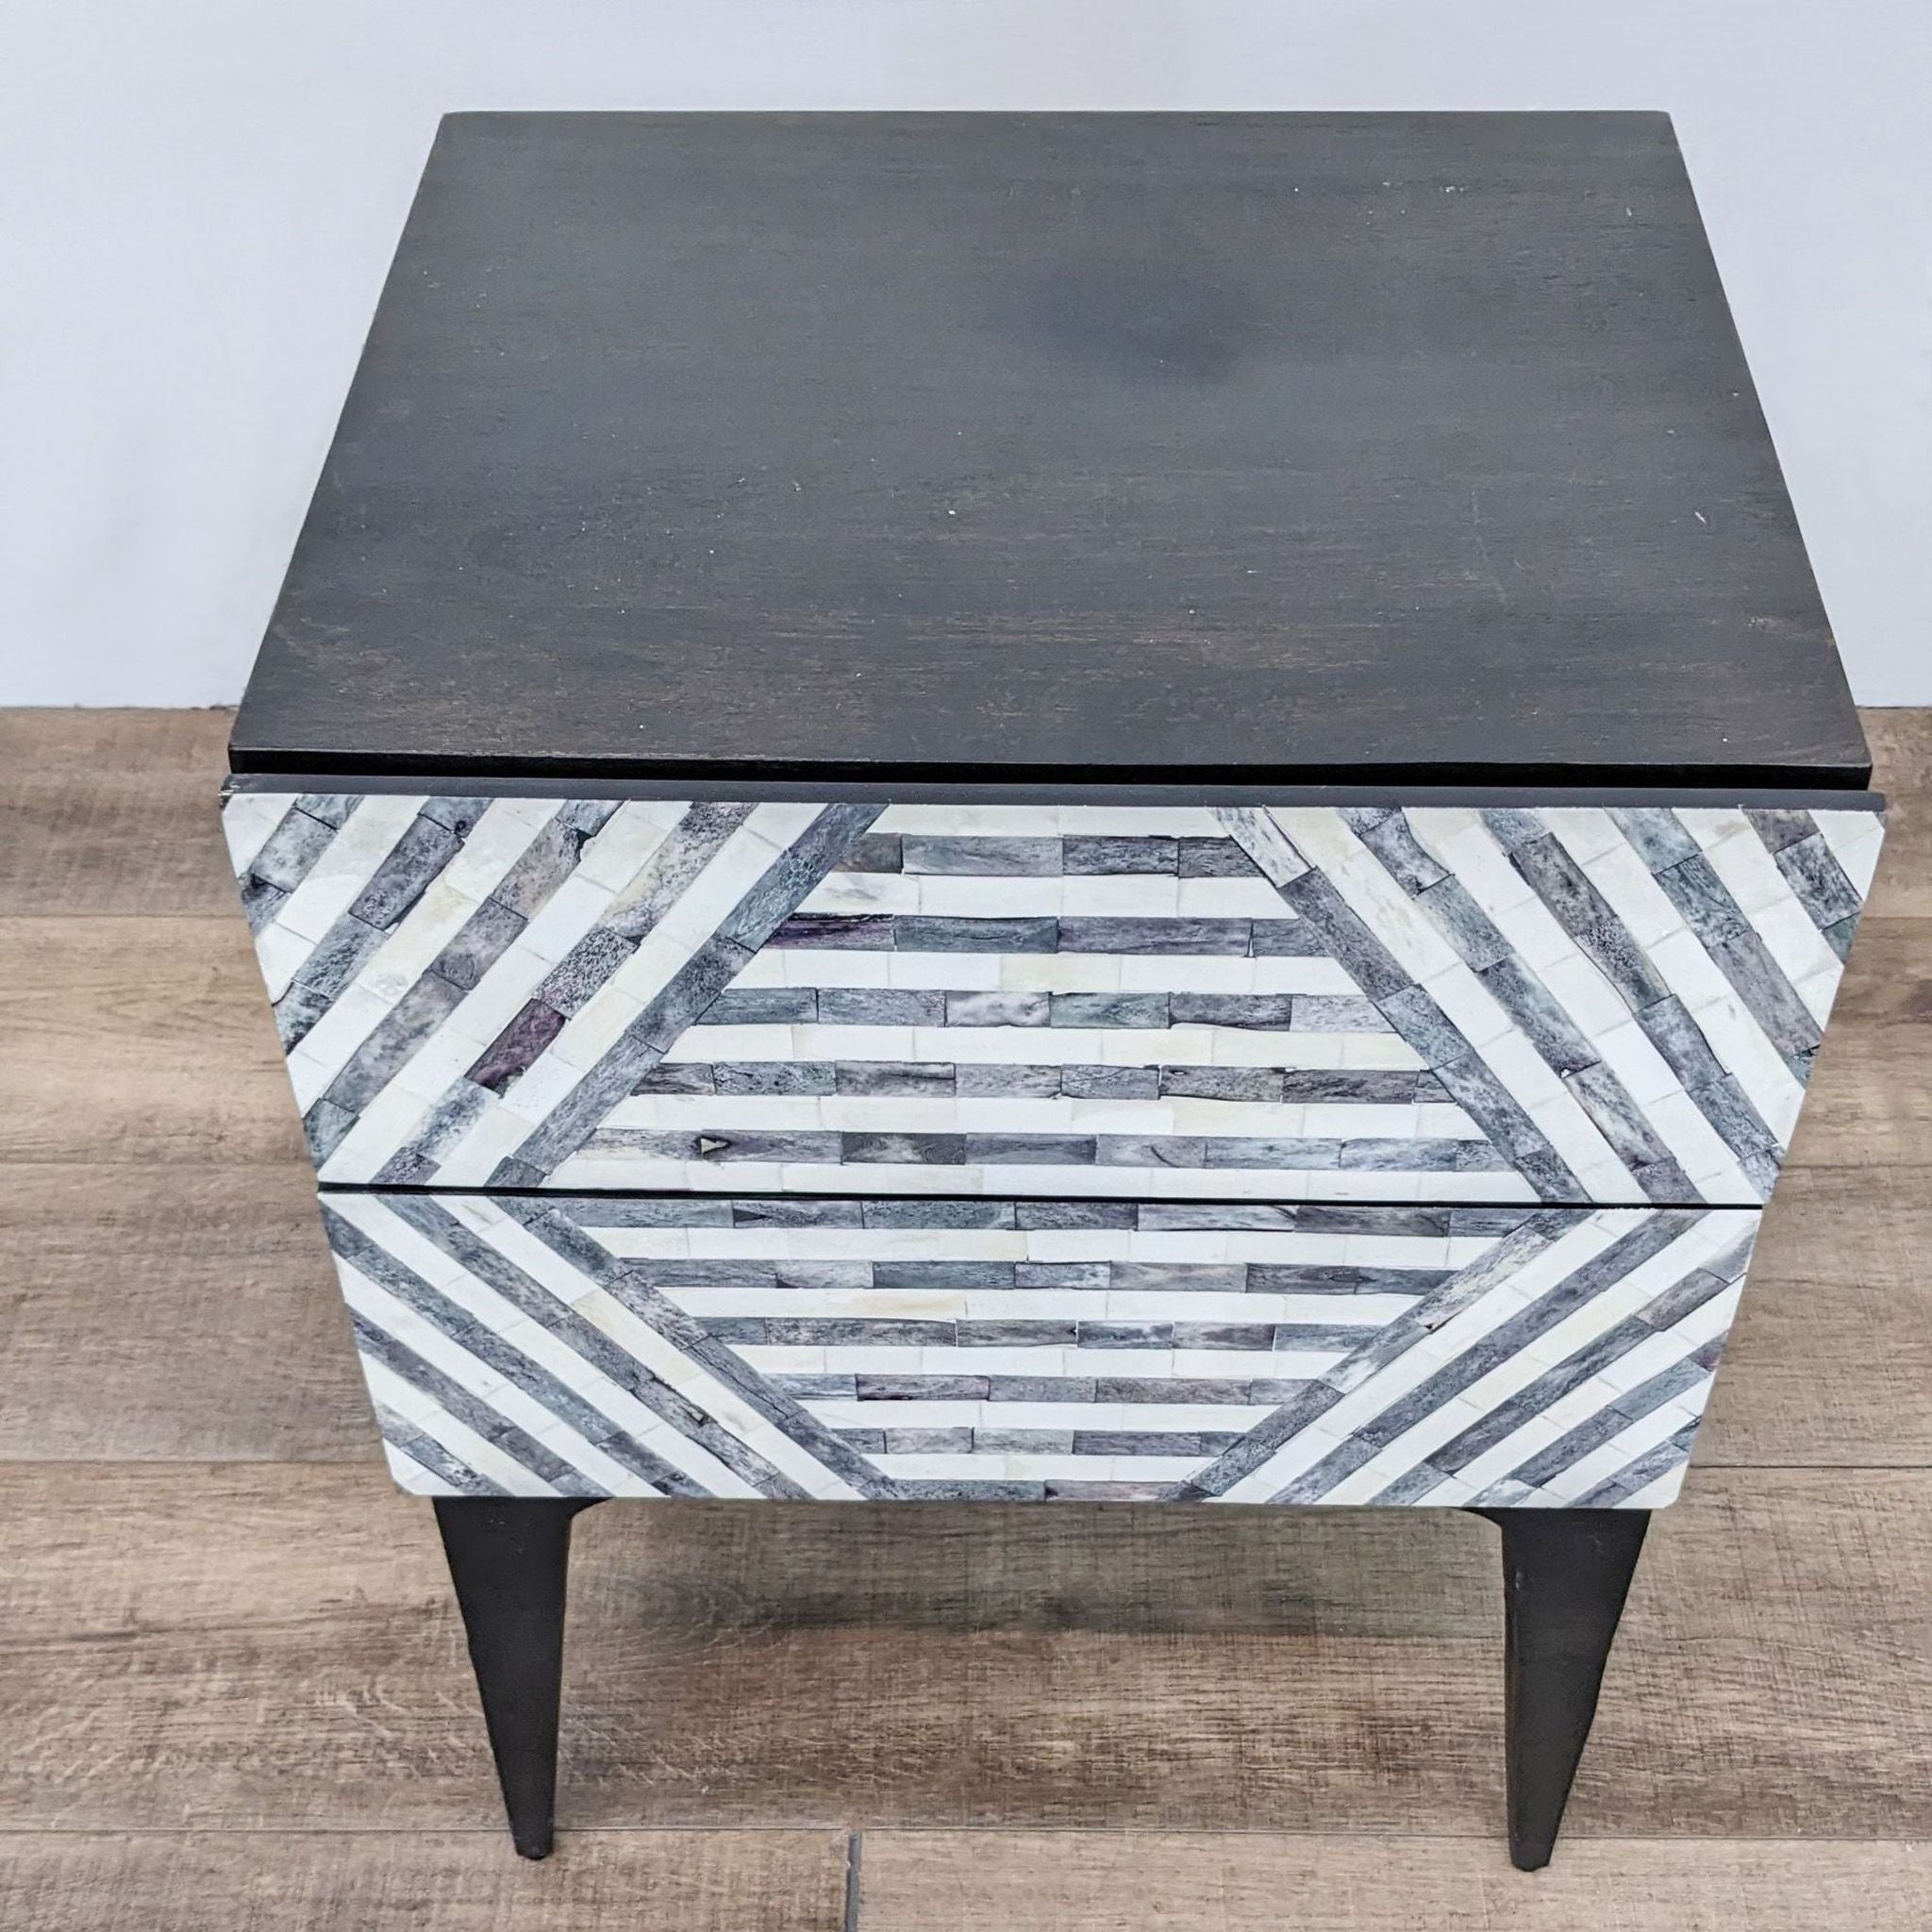 3. Angled perspective of a West Elm end table with a contrasting striped design on two drawers and solid top.